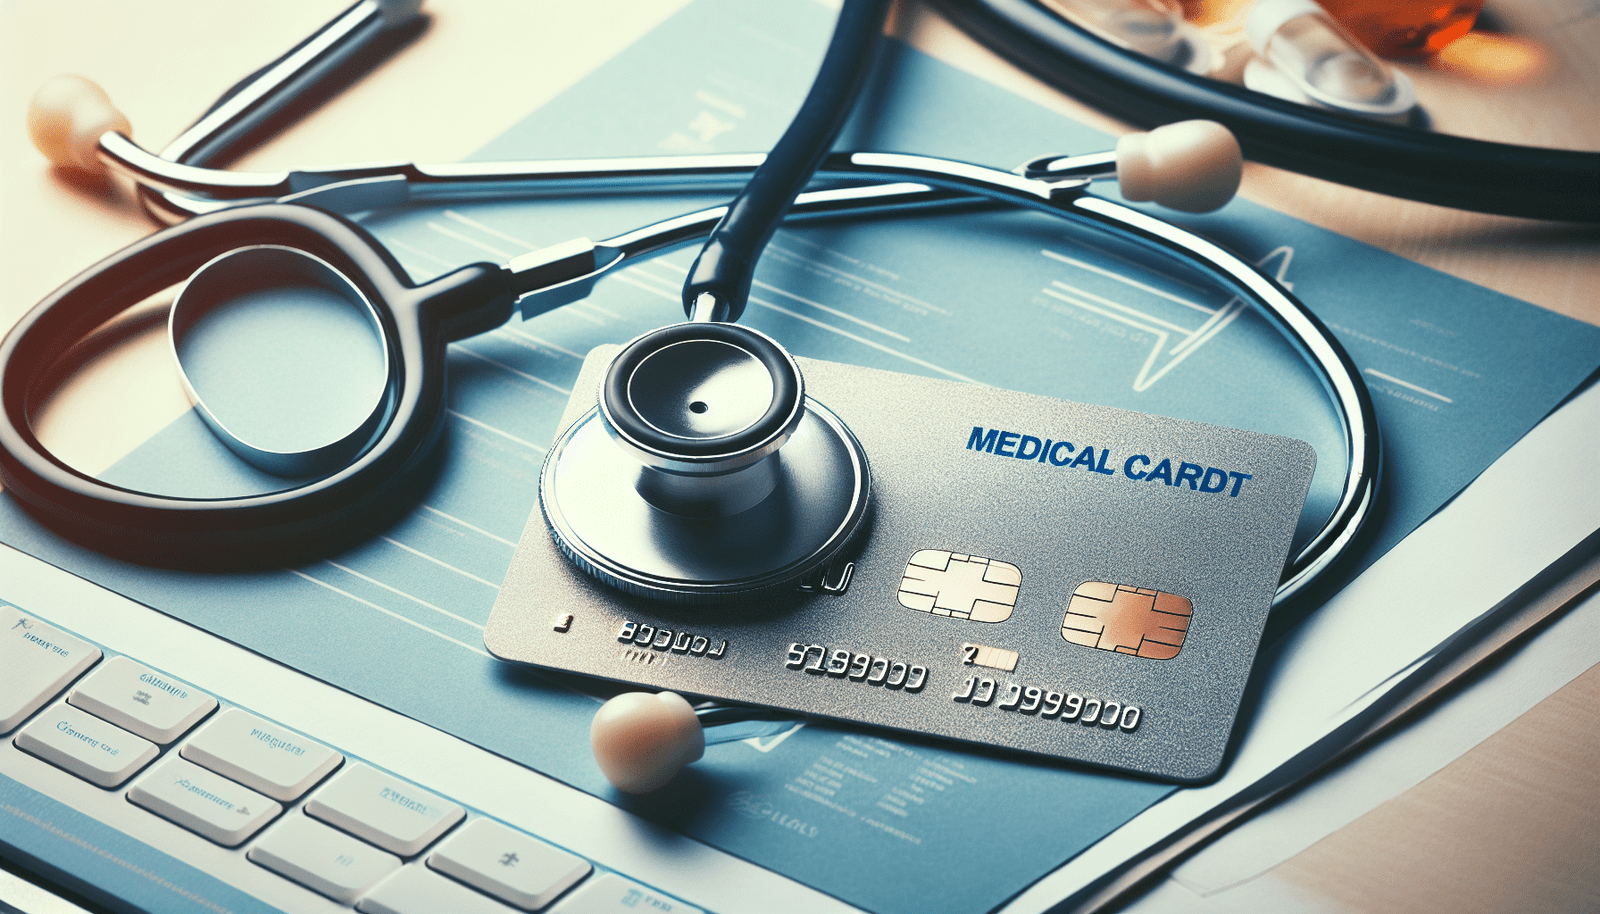 Finding The Best Credit Card For Medical Expenses In Malaysia